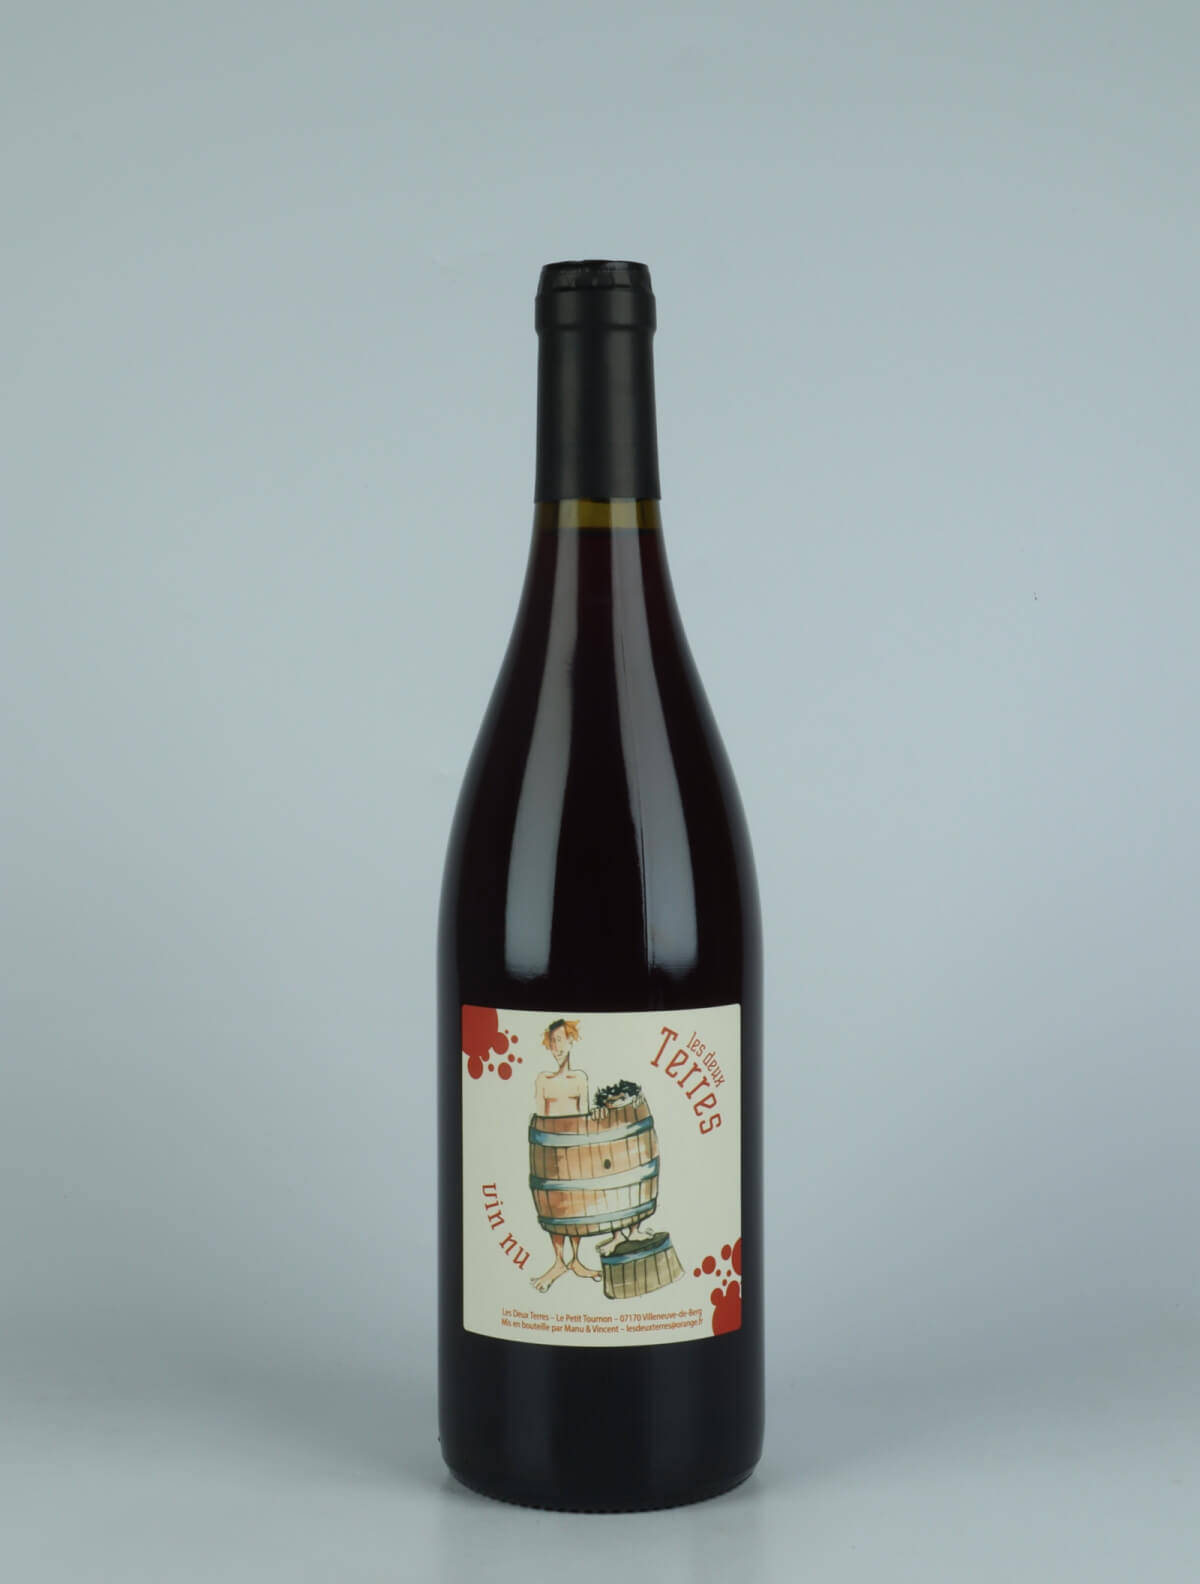 A bottle 2022 Vin Nu Rouge Red wine from Les Deux Terres, Ardèche in France